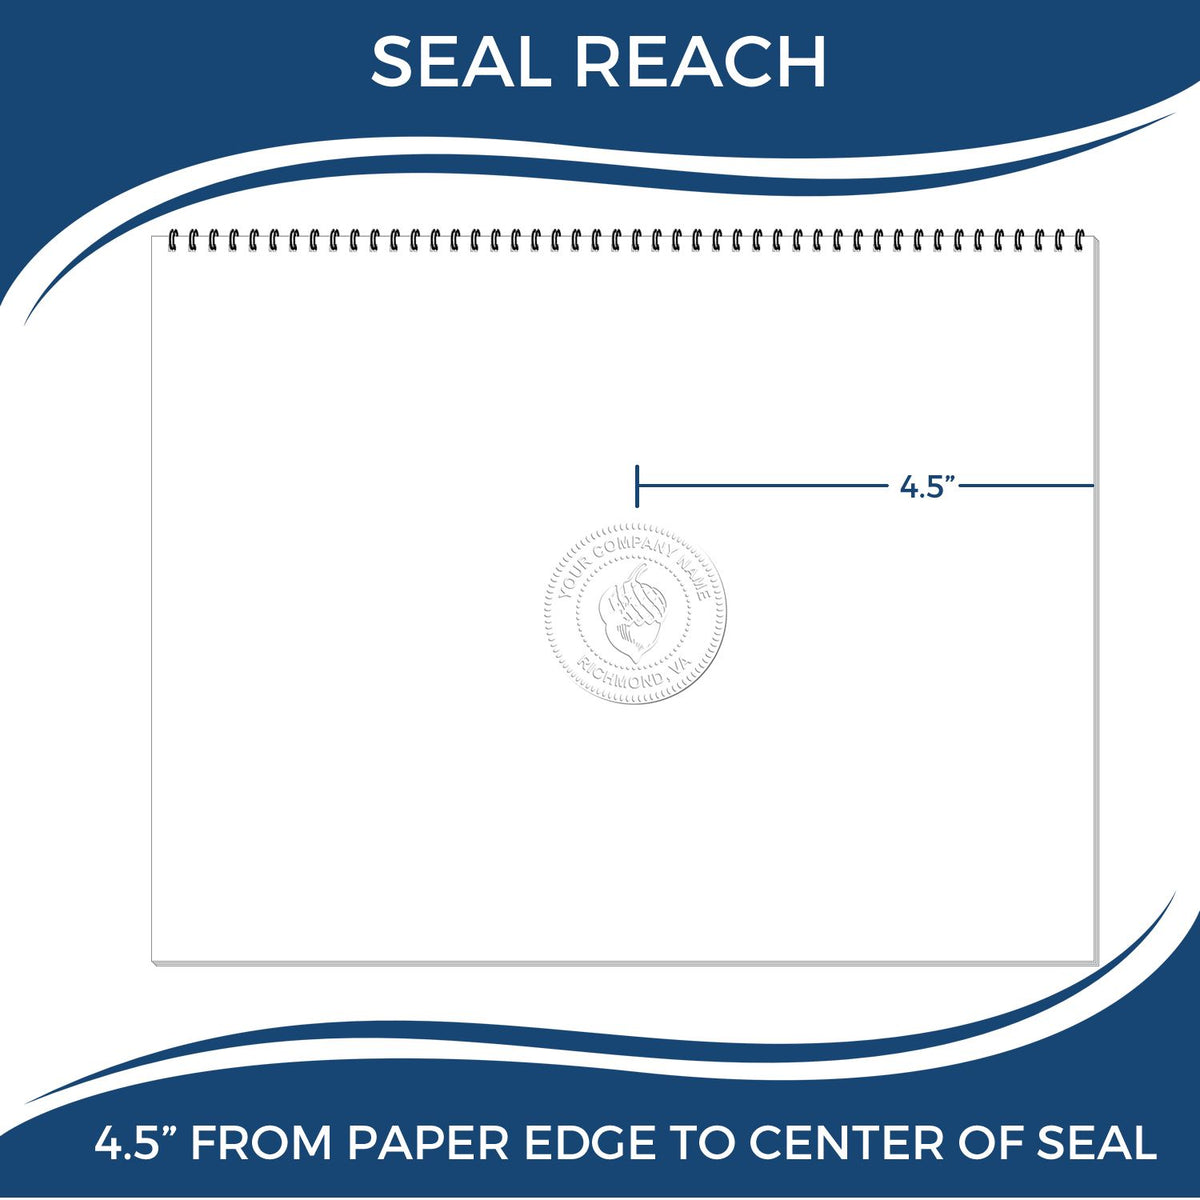 An infographic showing the seal reach which is represented by a ruler and a miniature seal image of the Extended Long Reach Florida Architect Seal Embosser